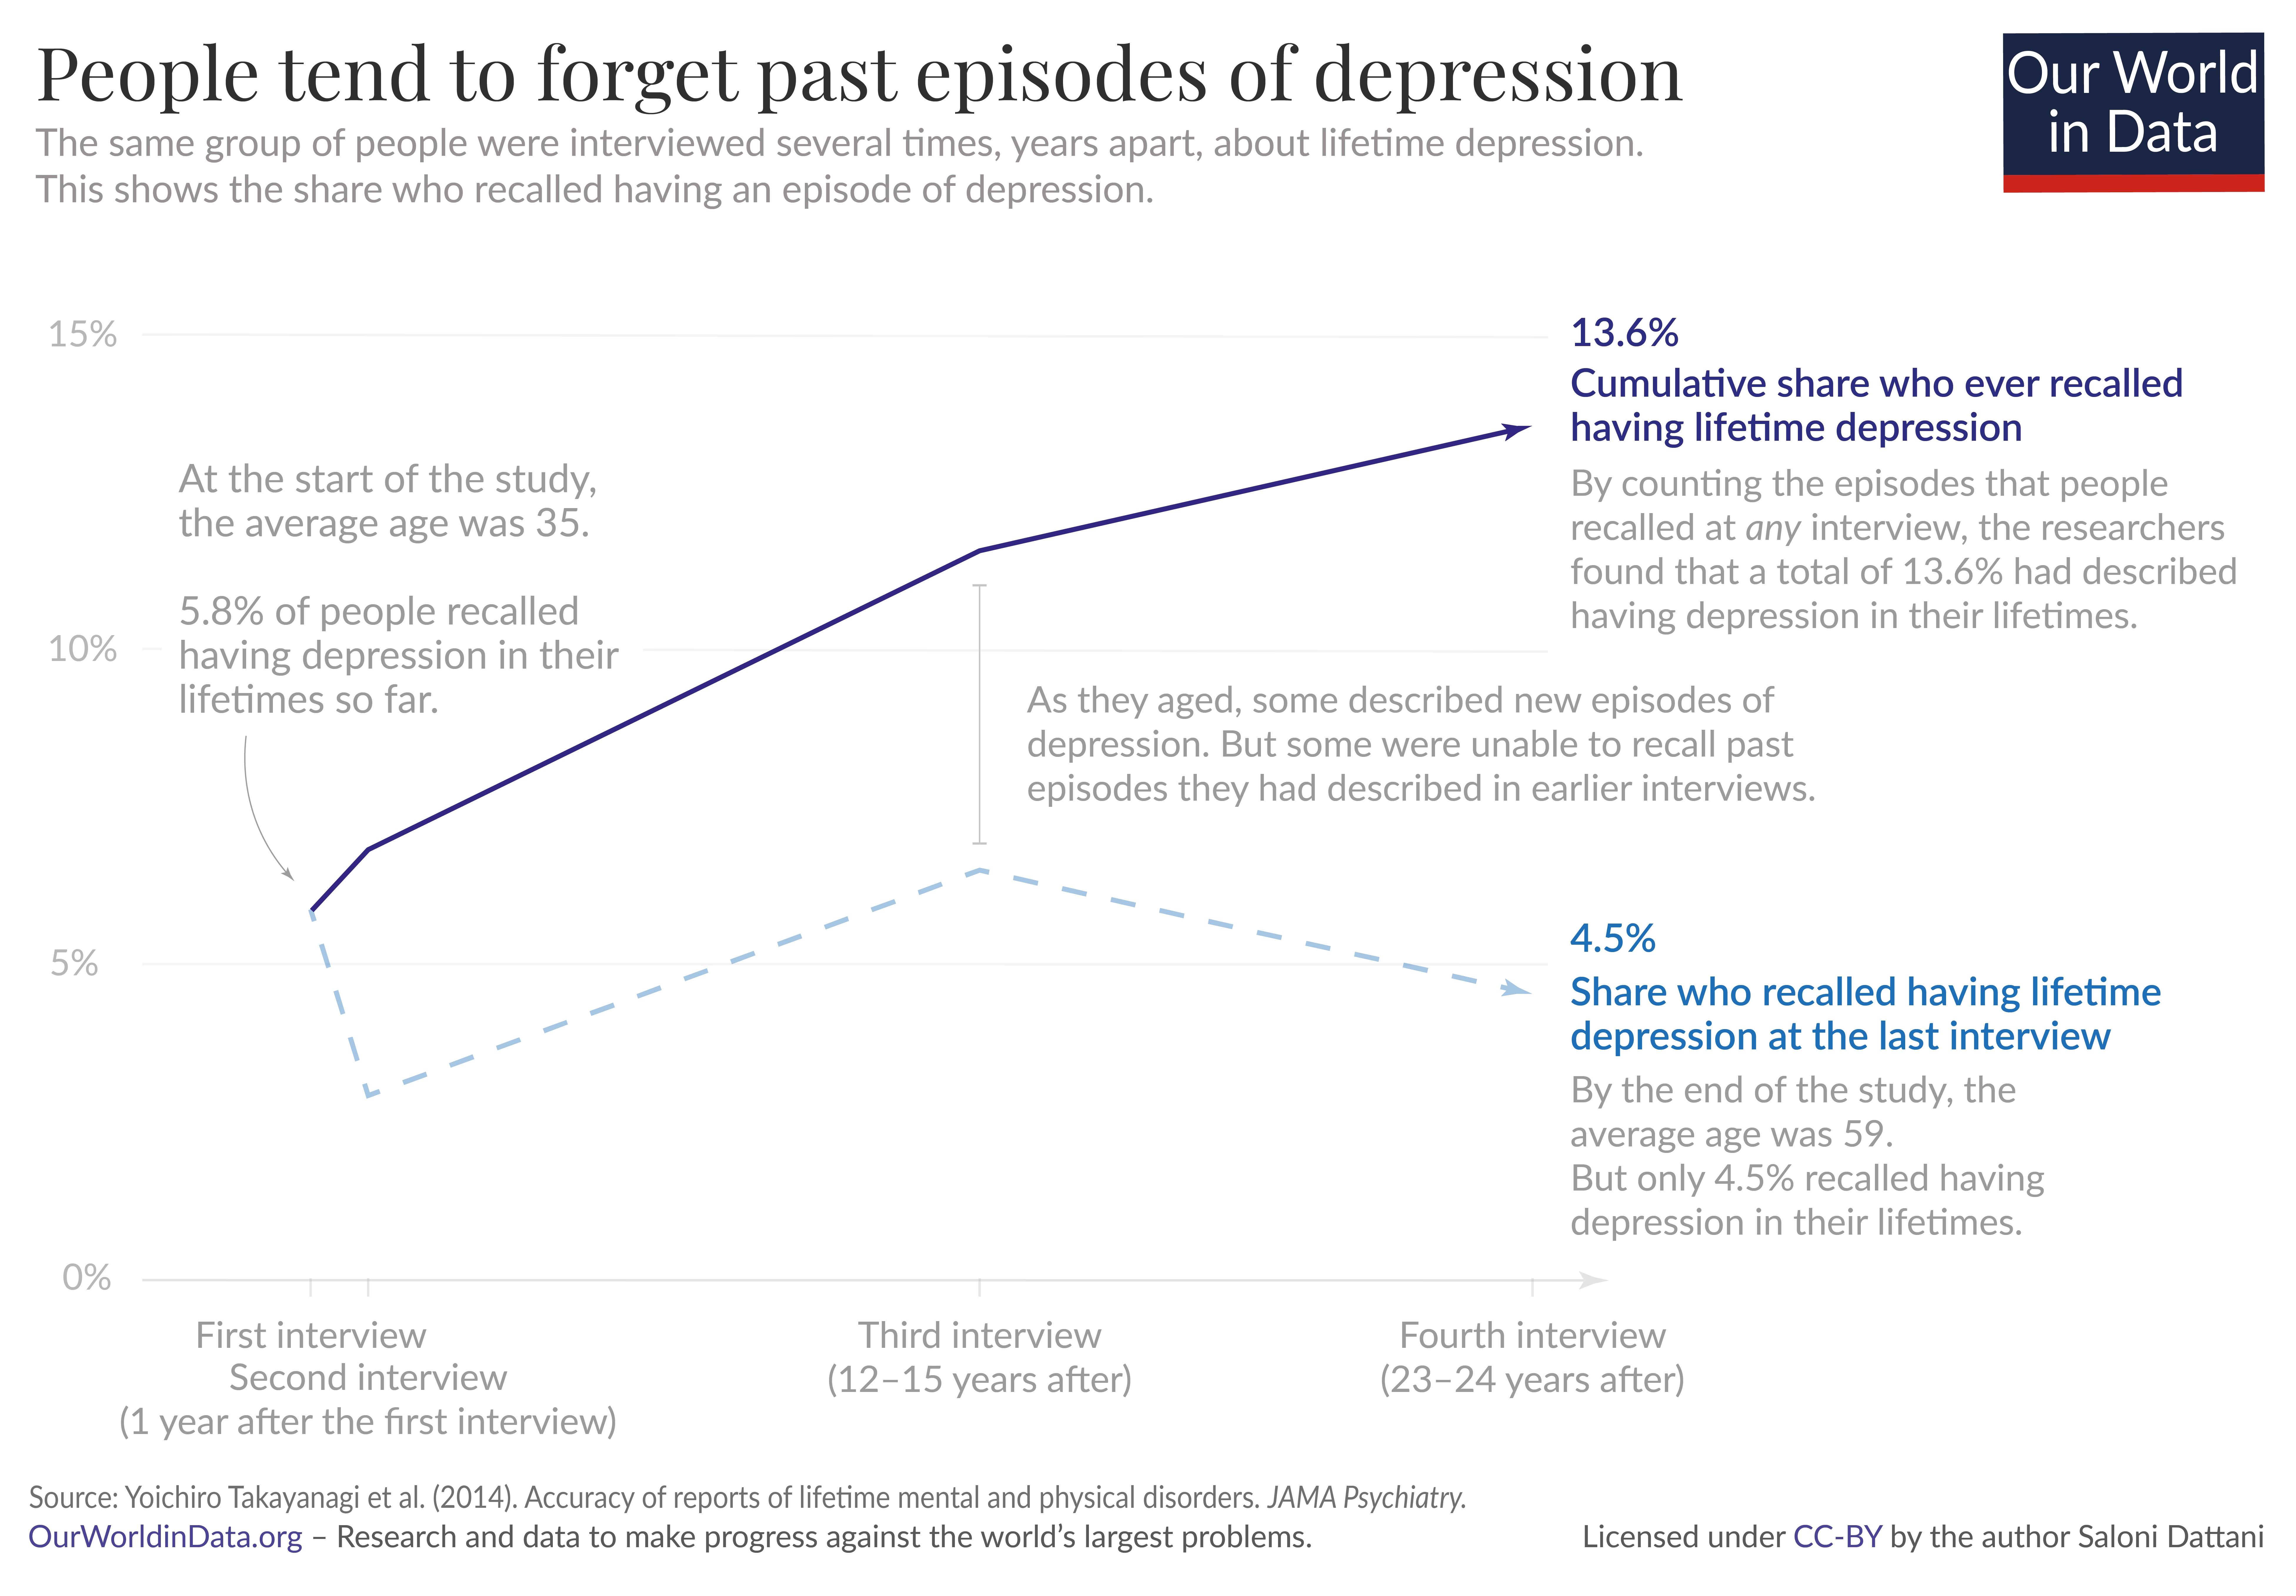 People tend to forget episodes of depression.